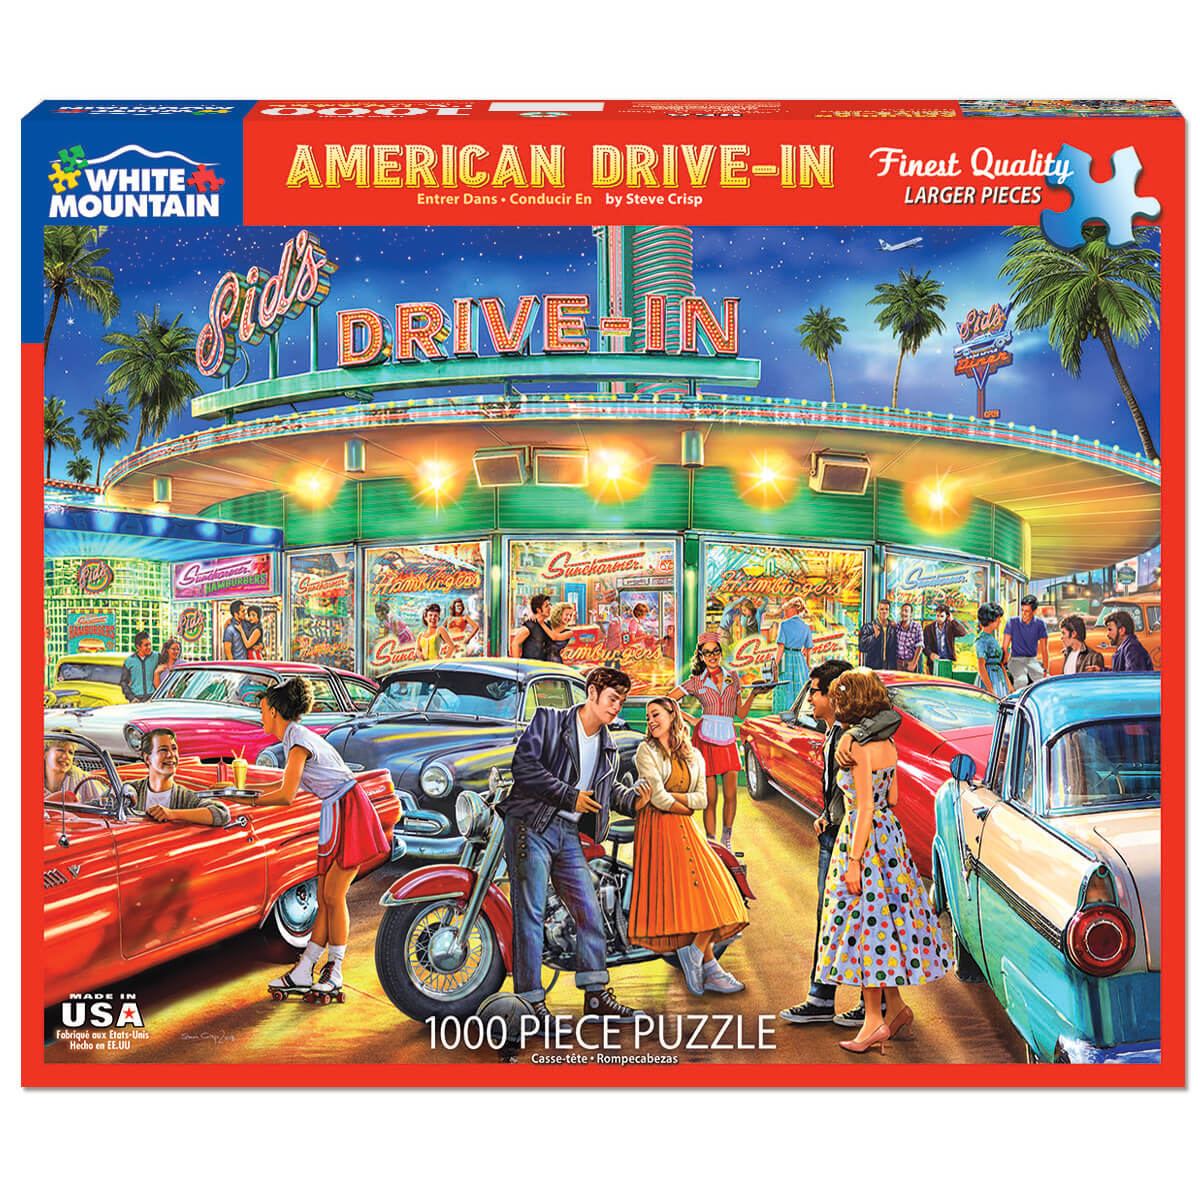 White Mountain Puzzles American Drive-In 1000 Piece Jigsaw Puzzle